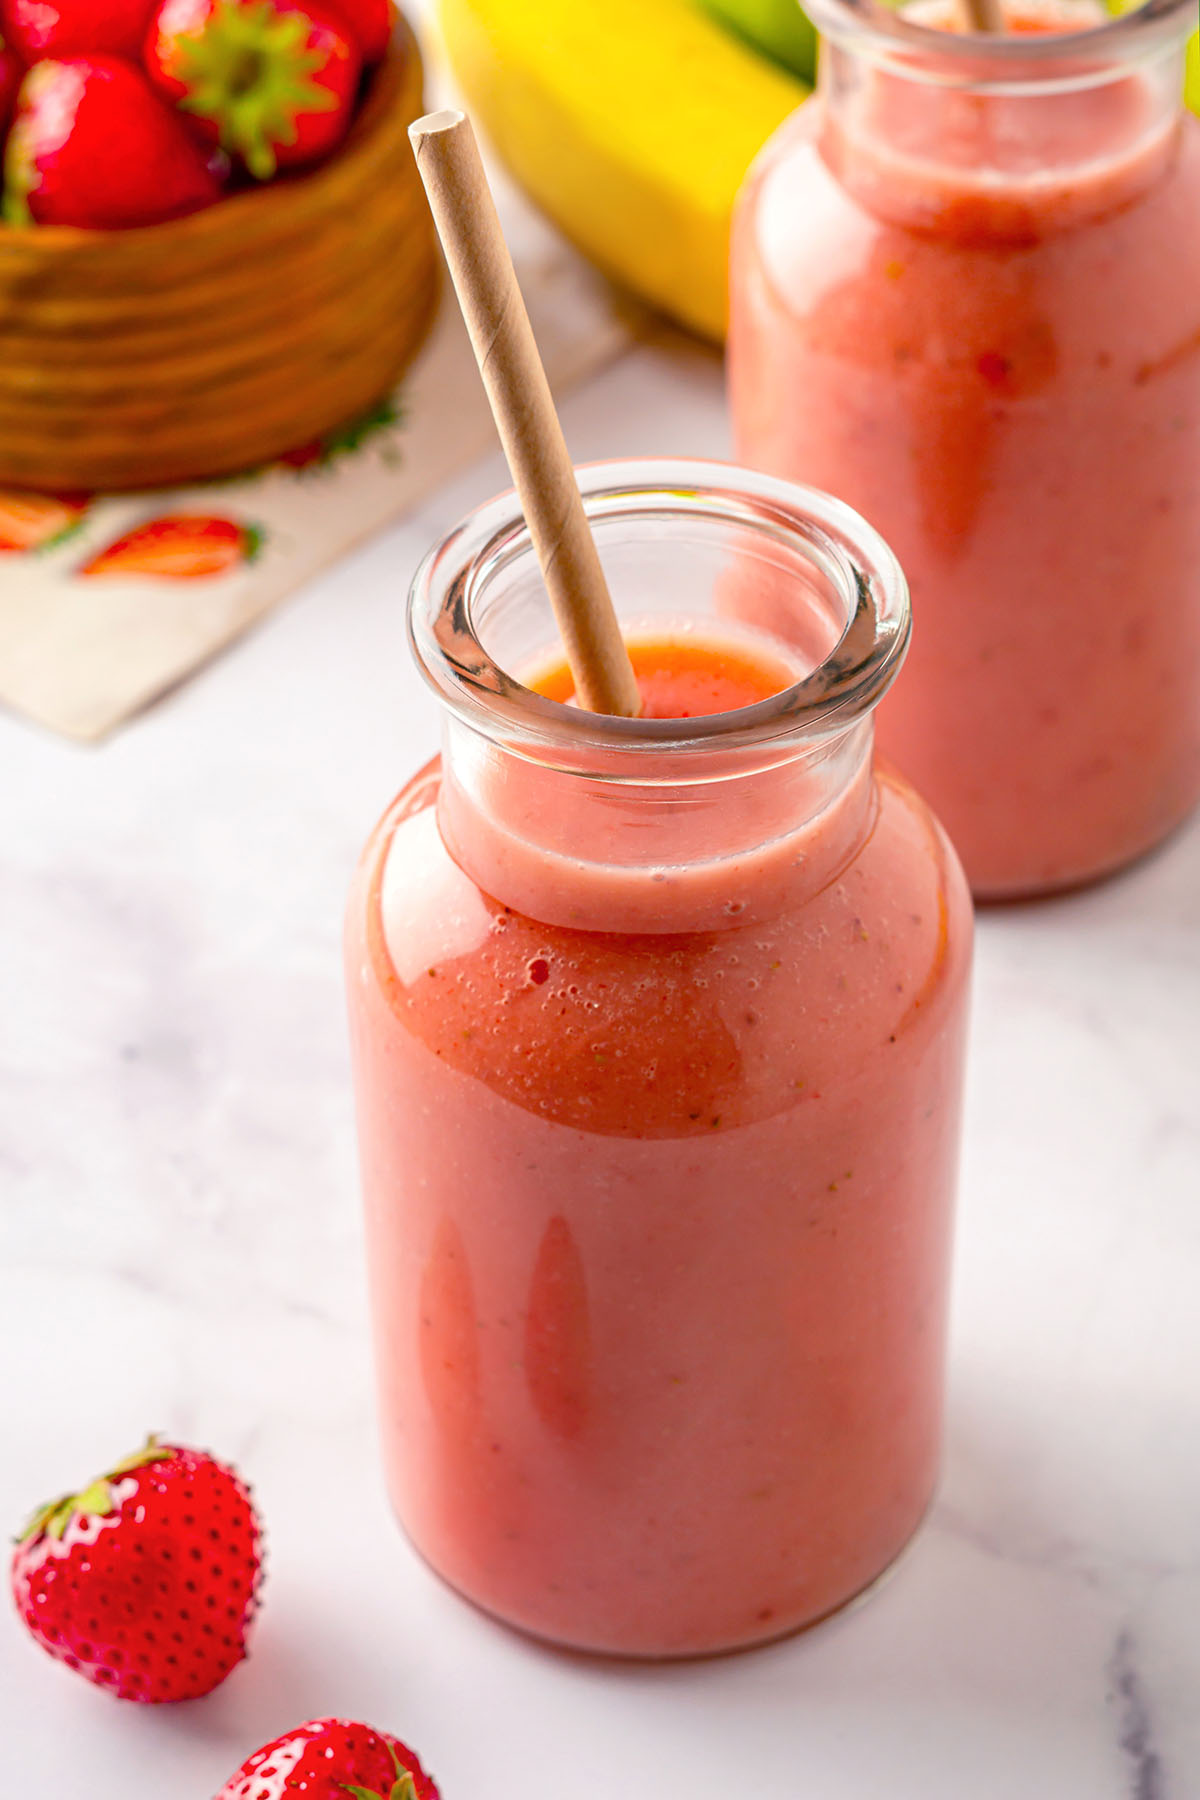 Bottles of strawberry apple smoothie with straw inside